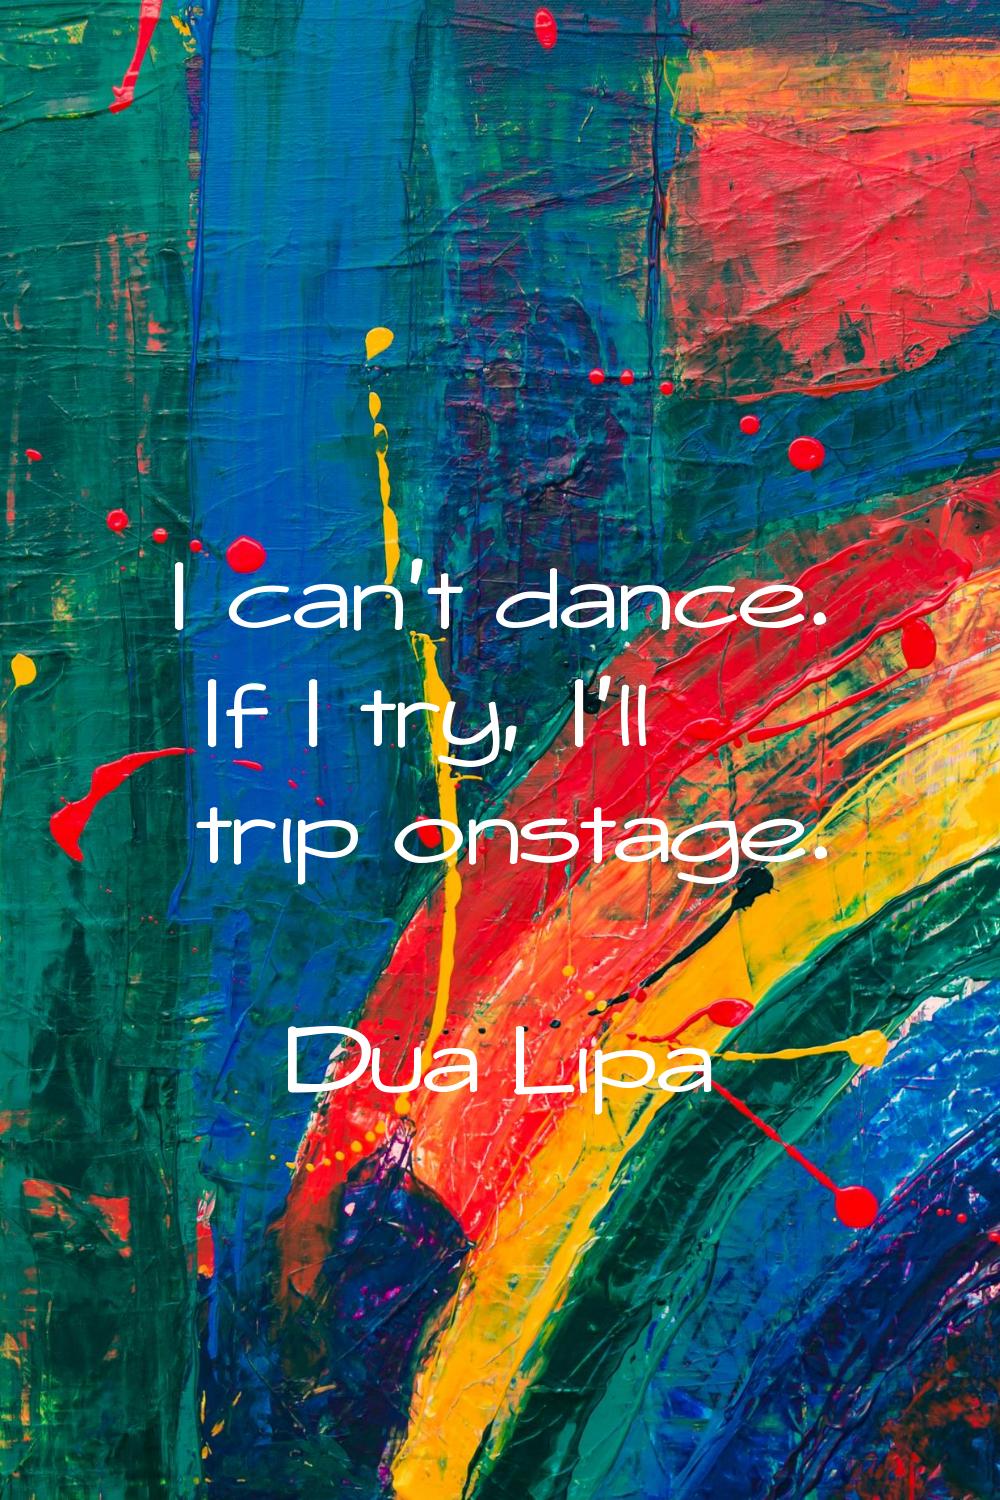 I can't dance. If I try, I'll trip onstage.